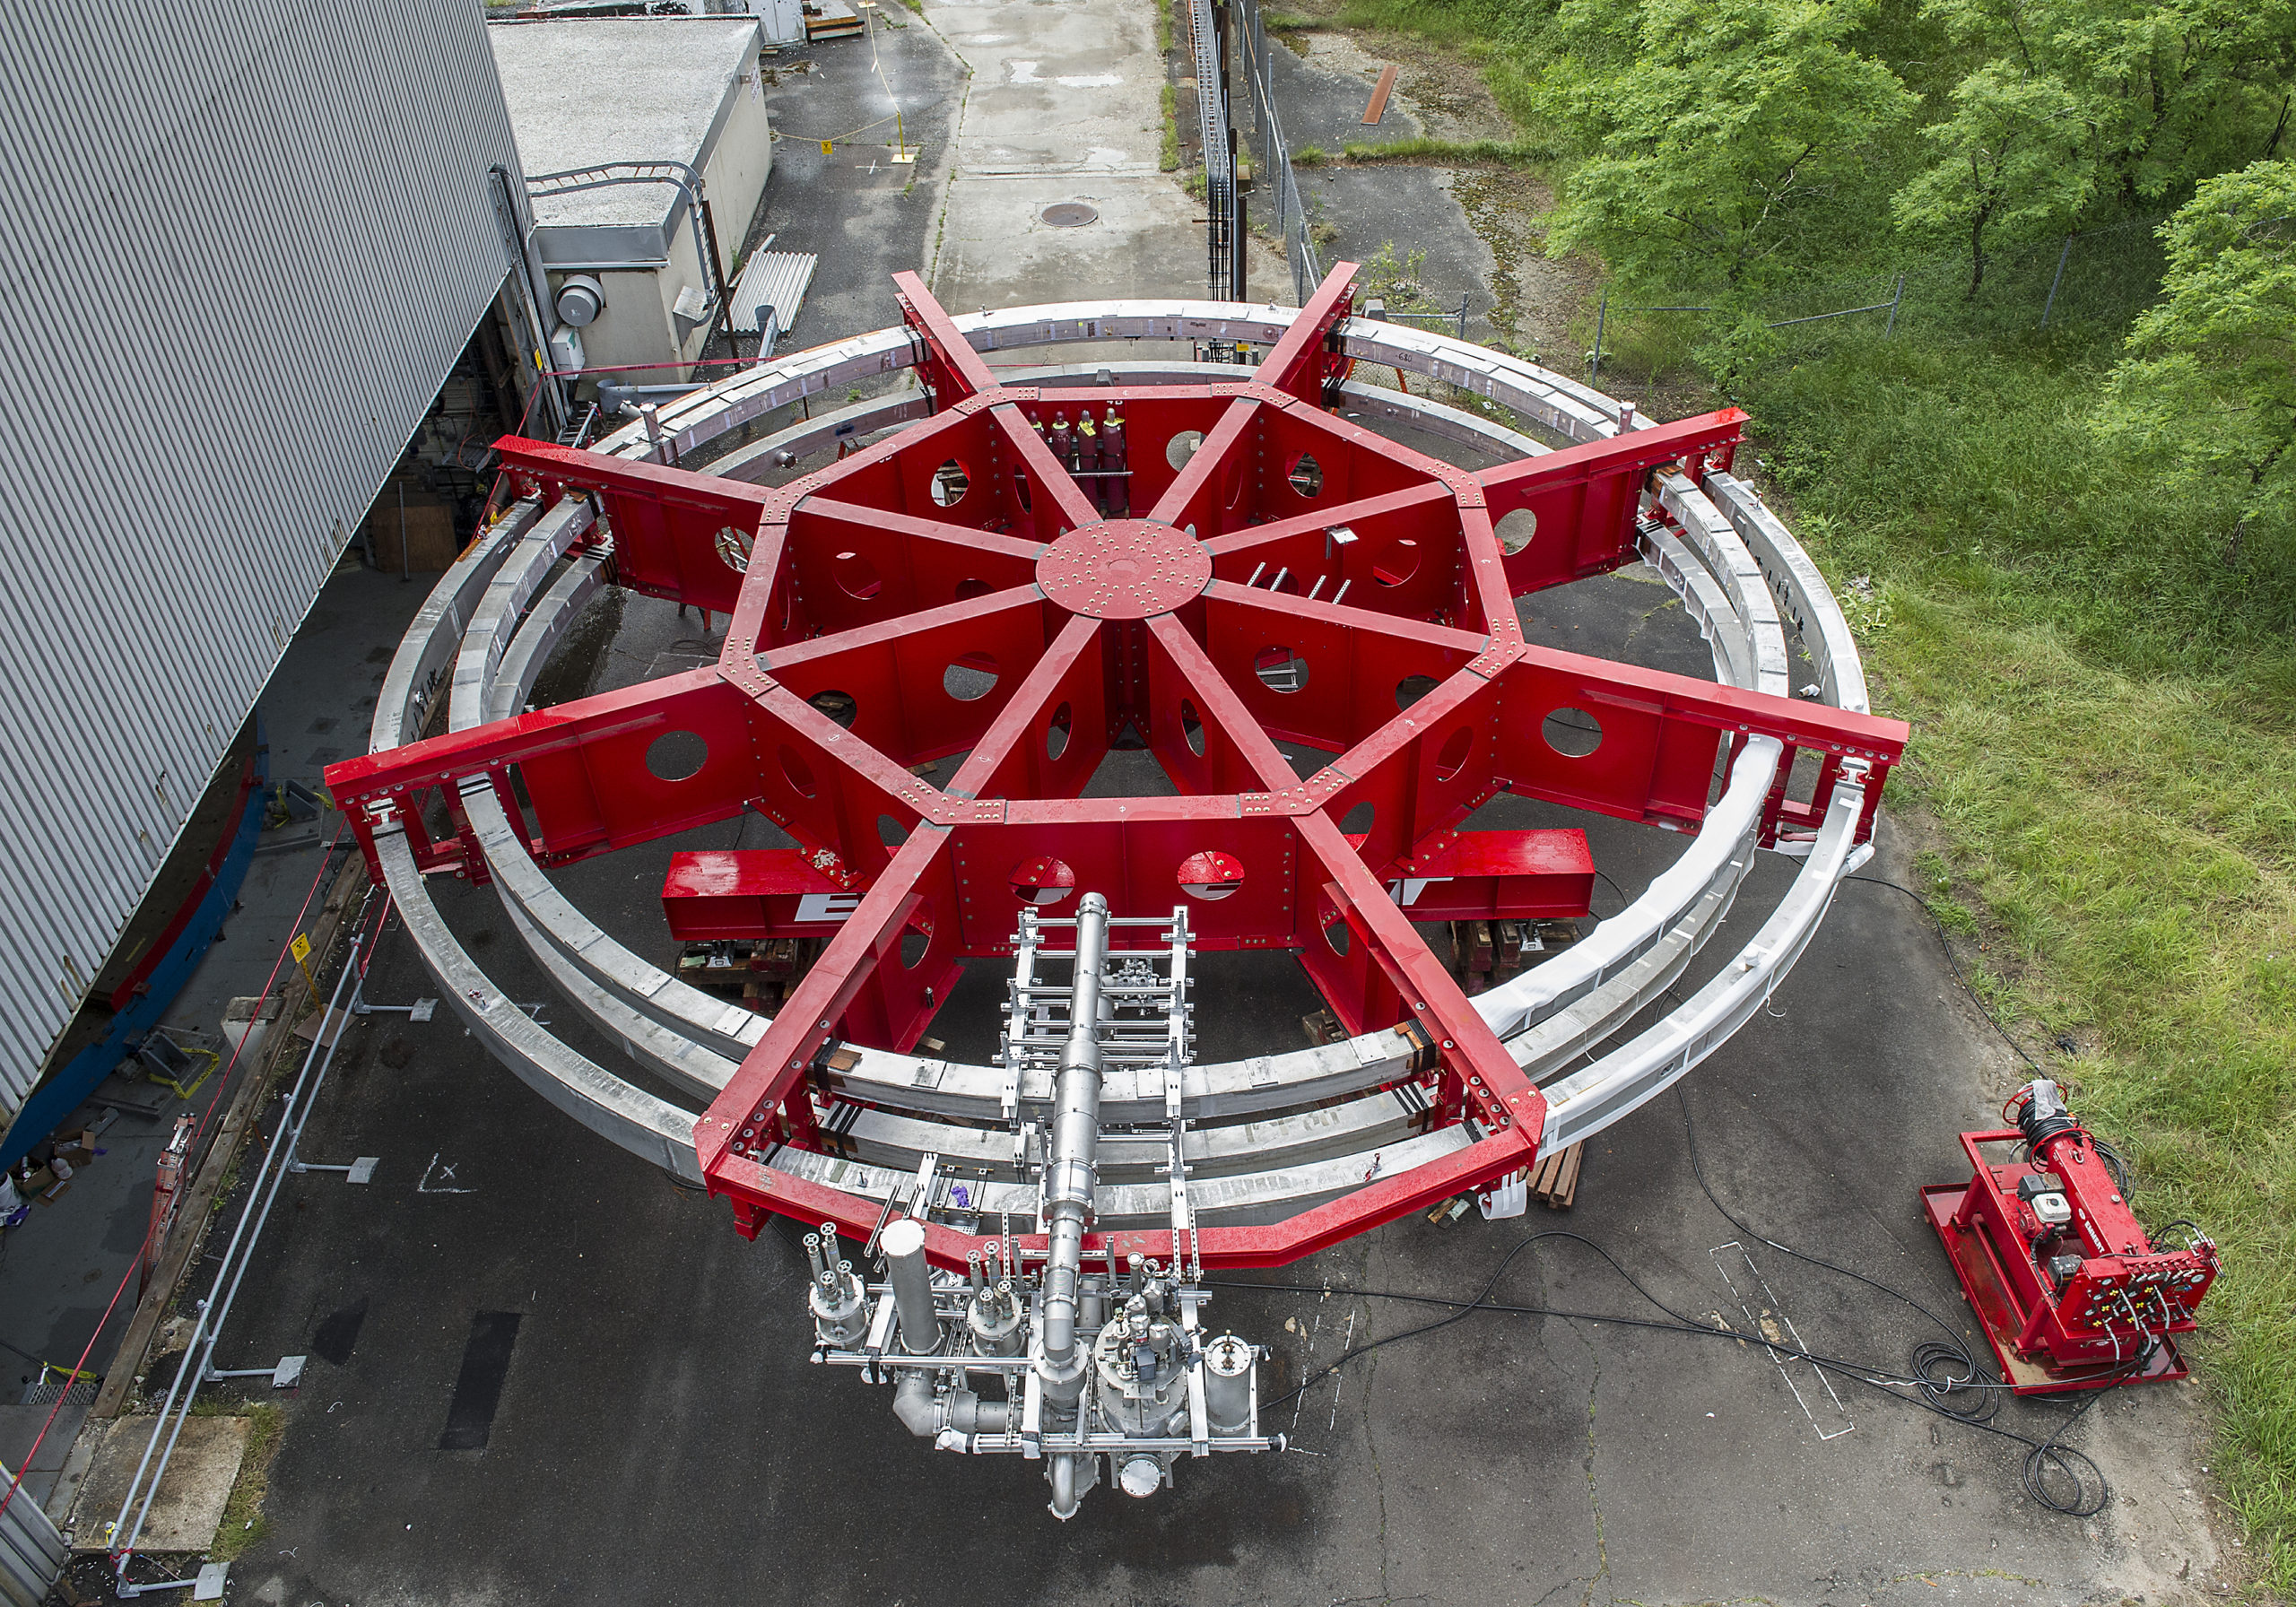 Monster Machines: Hunting Rare Subatomic Particles With This 15m Electromagnet